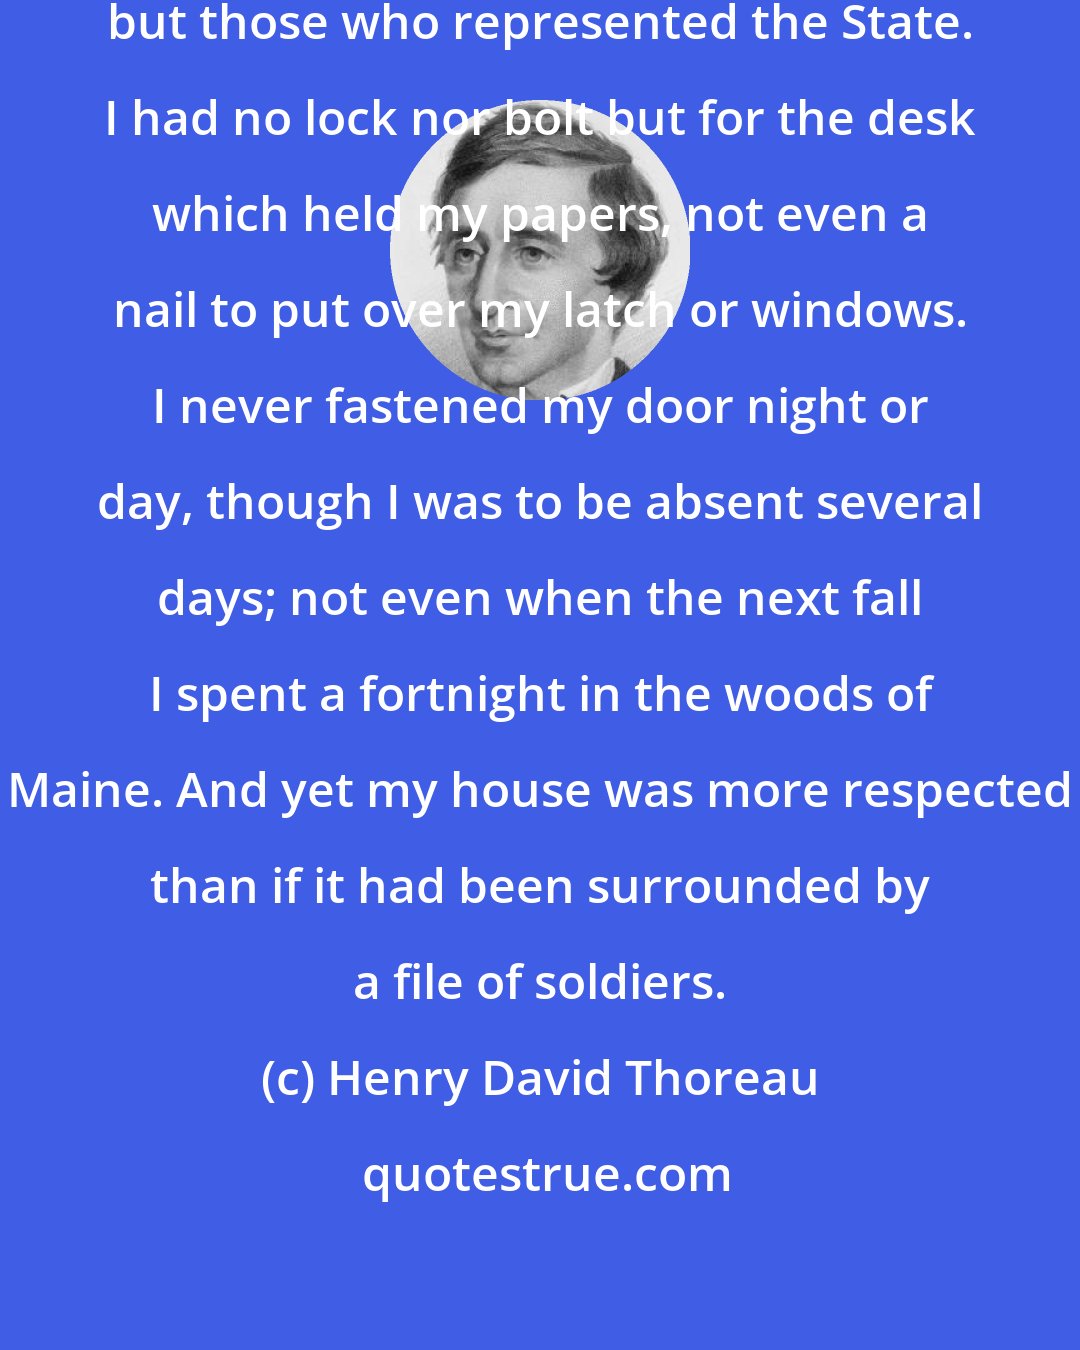 Henry David Thoreau: I was never molested by any person but those who represented the State. I had no lock nor bolt but for the desk which held my papers, not even a nail to put over my latch or windows. I never fastened my door night or day, though I was to be absent several days; not even when the next fall I spent a fortnight in the woods of Maine. And yet my house was more respected than if it had been surrounded by a file of soldiers.